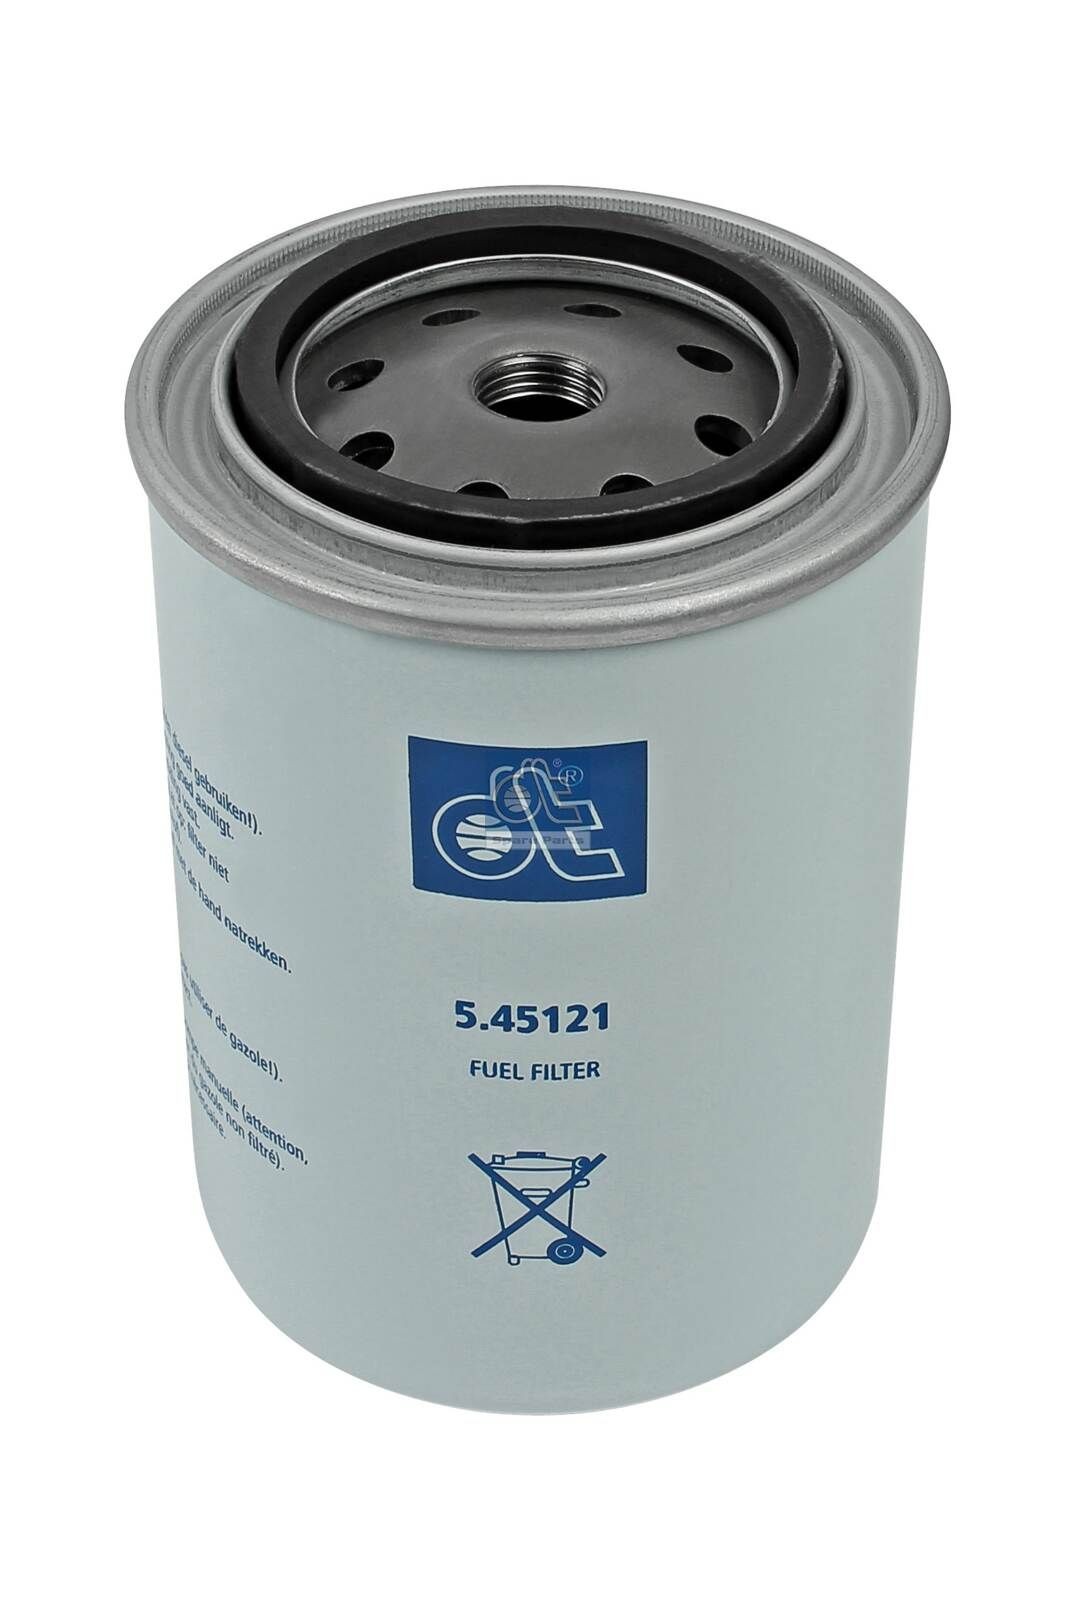 WDK 940/5 DT Spare Parts 5.45121 Fuel filter 1161 003